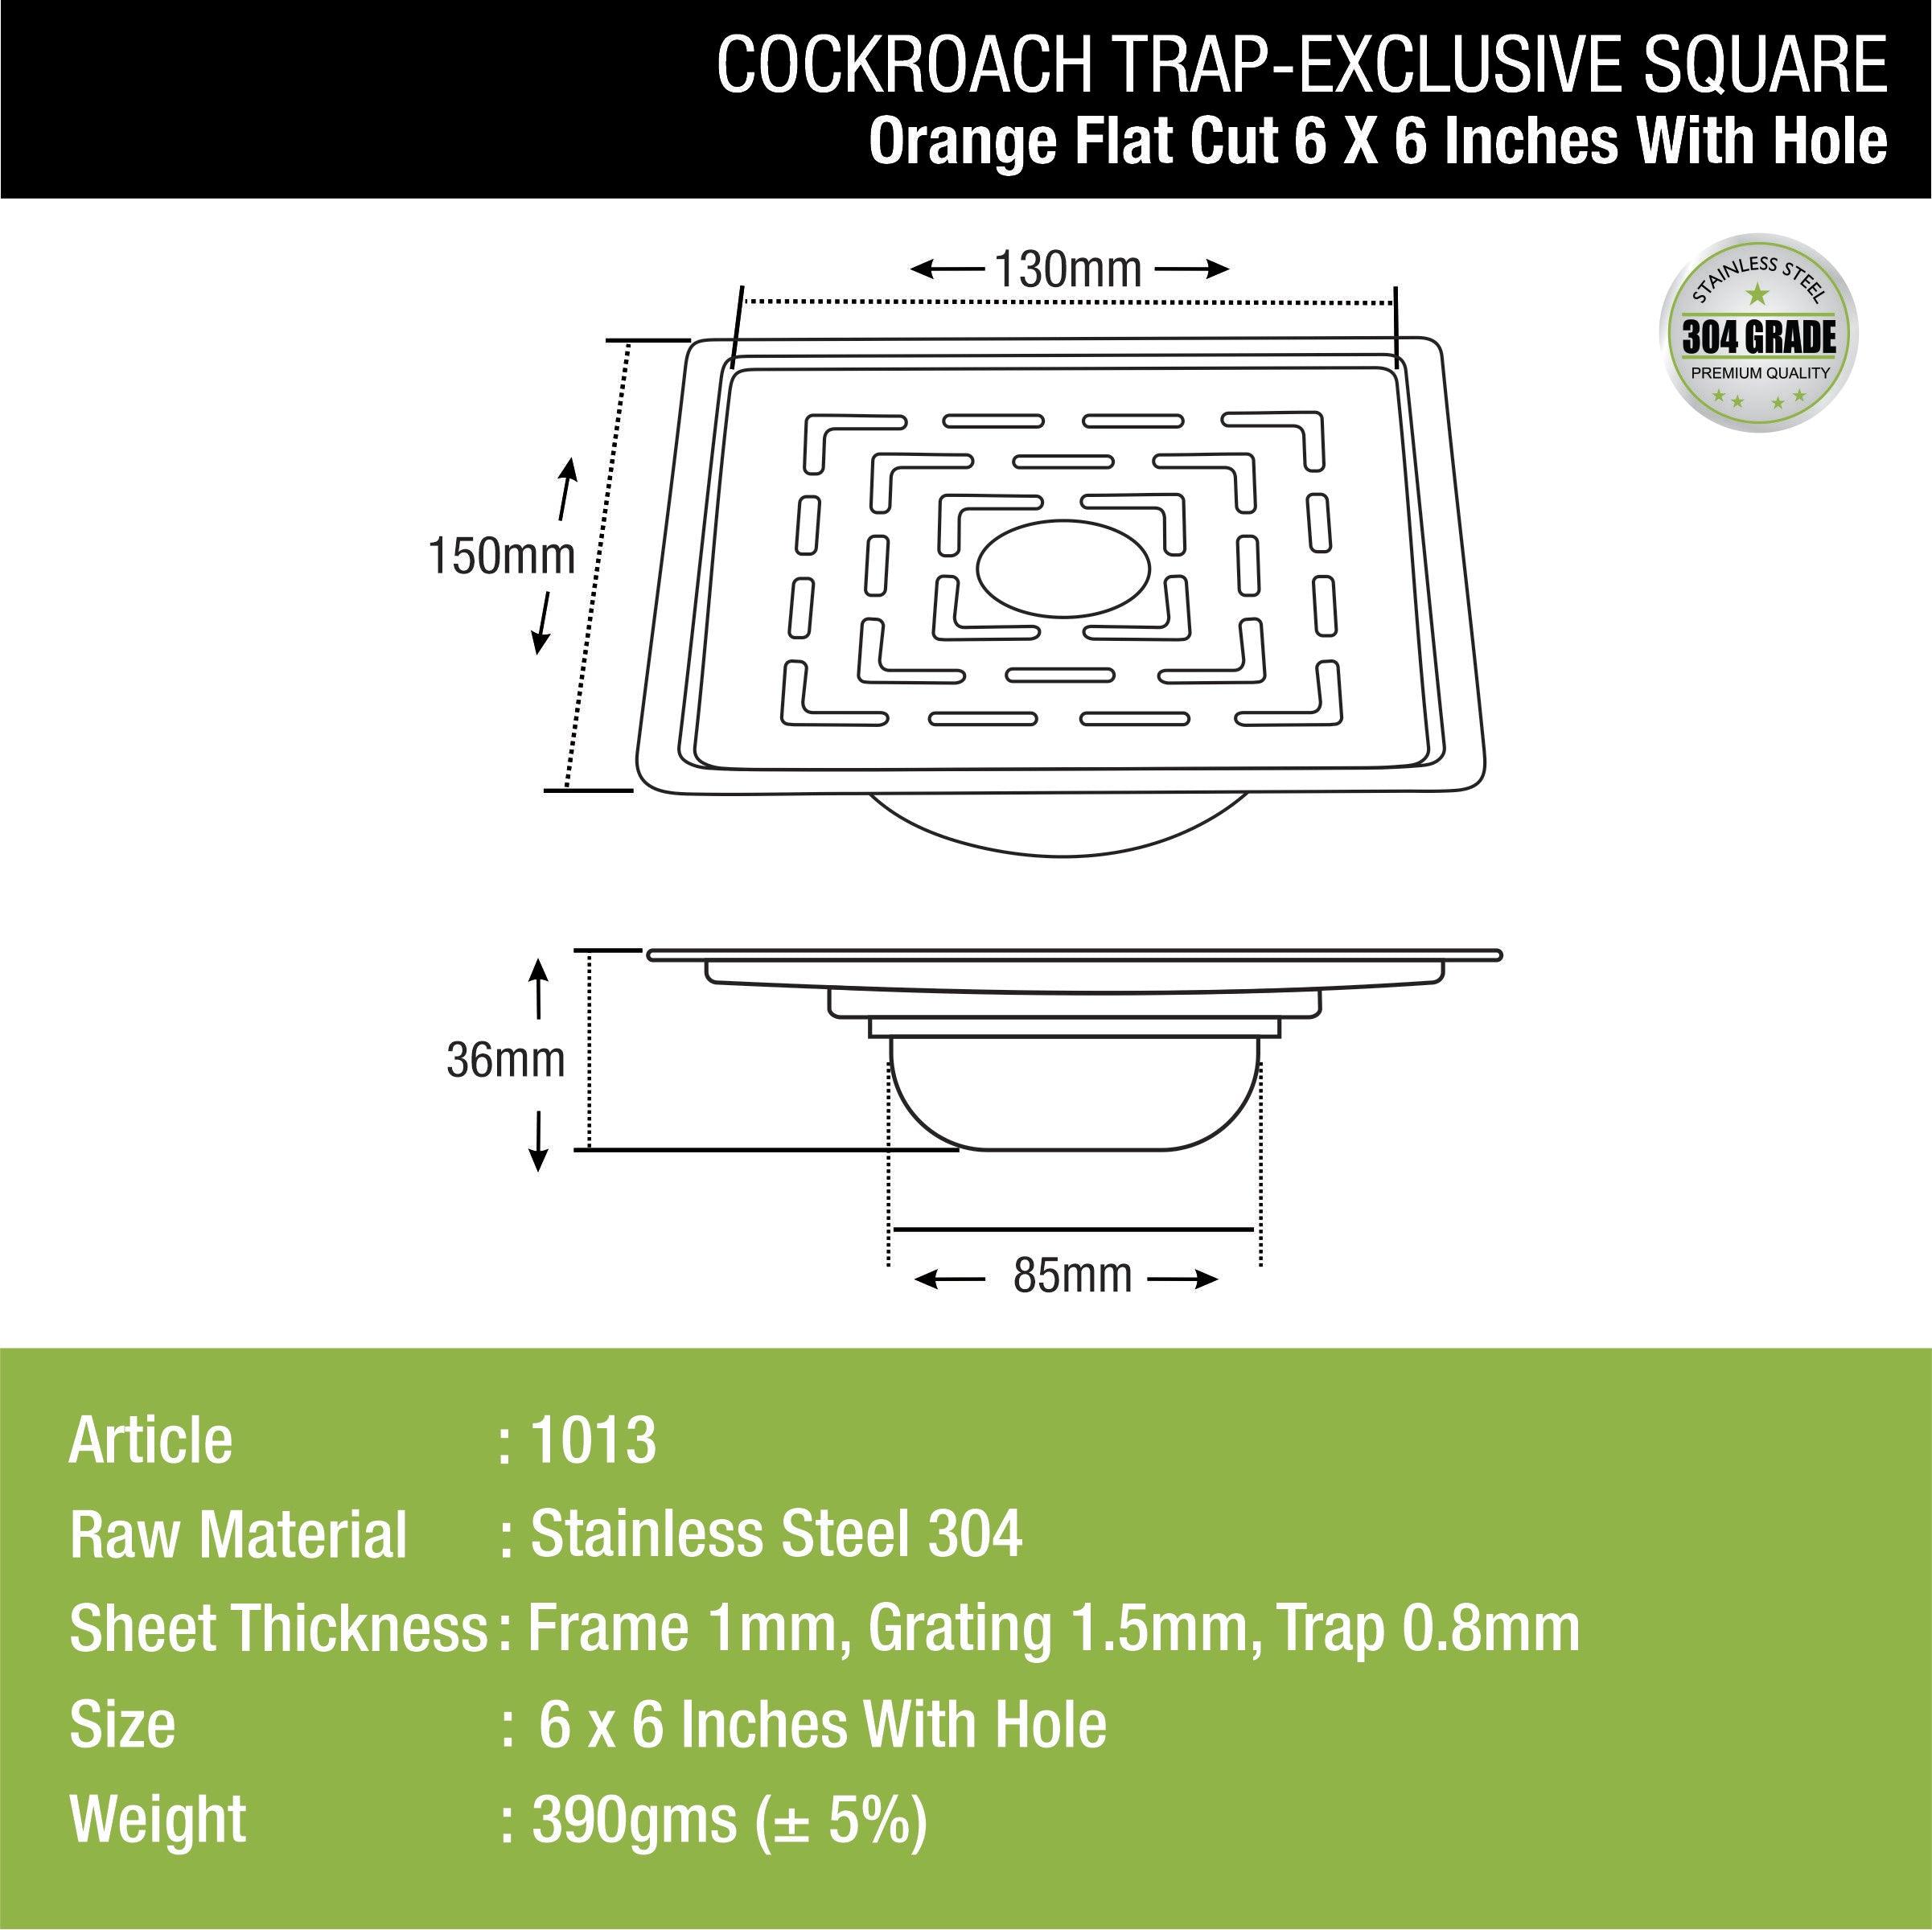 Orange Exclusive Square Flat Cut Floor Drain (6 x 6 Inches) with Hole and Cockroach Trap dimensions and sizes